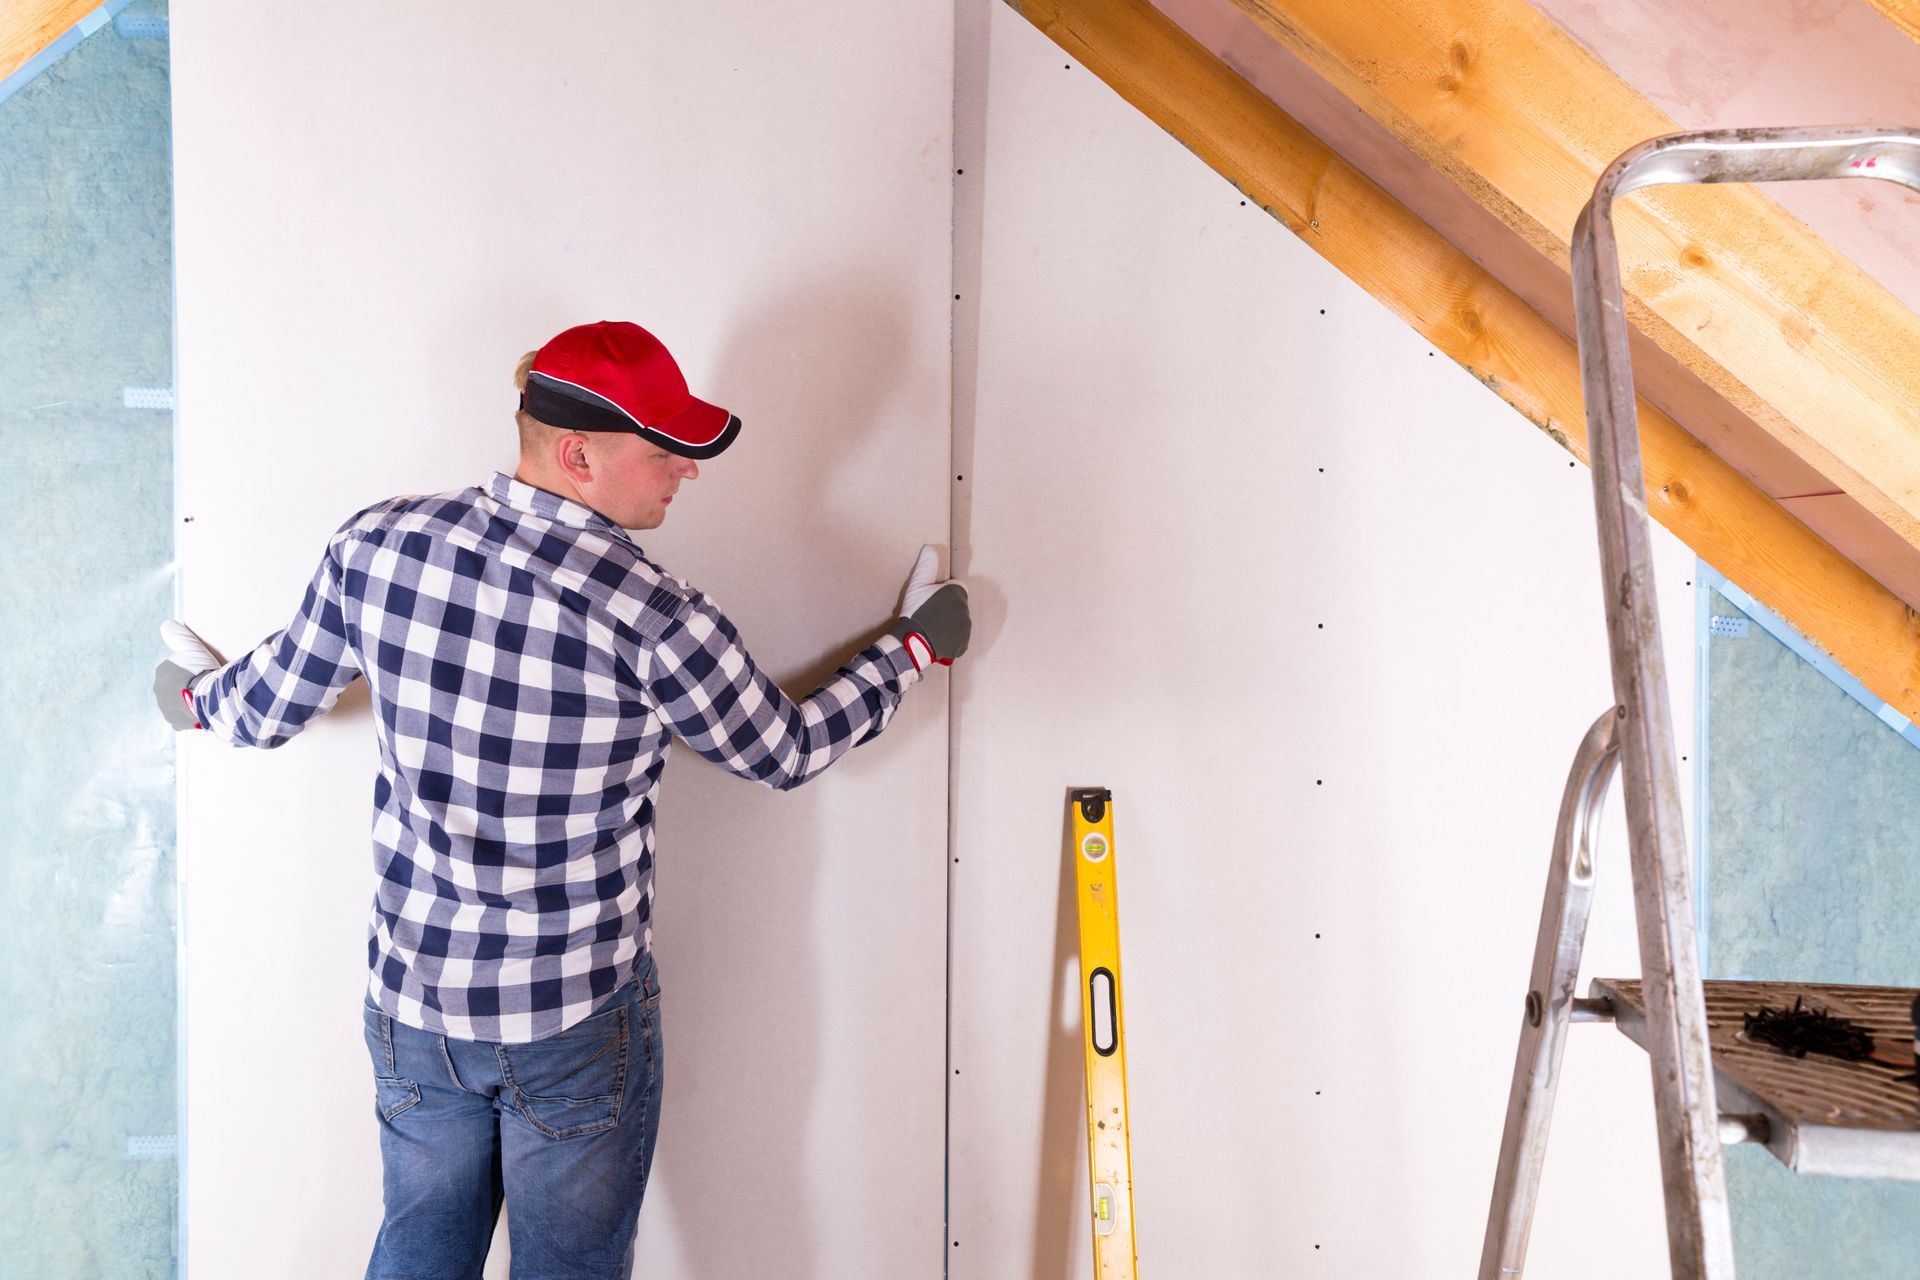 A skilled worker meticulously restoring damaged drywall.